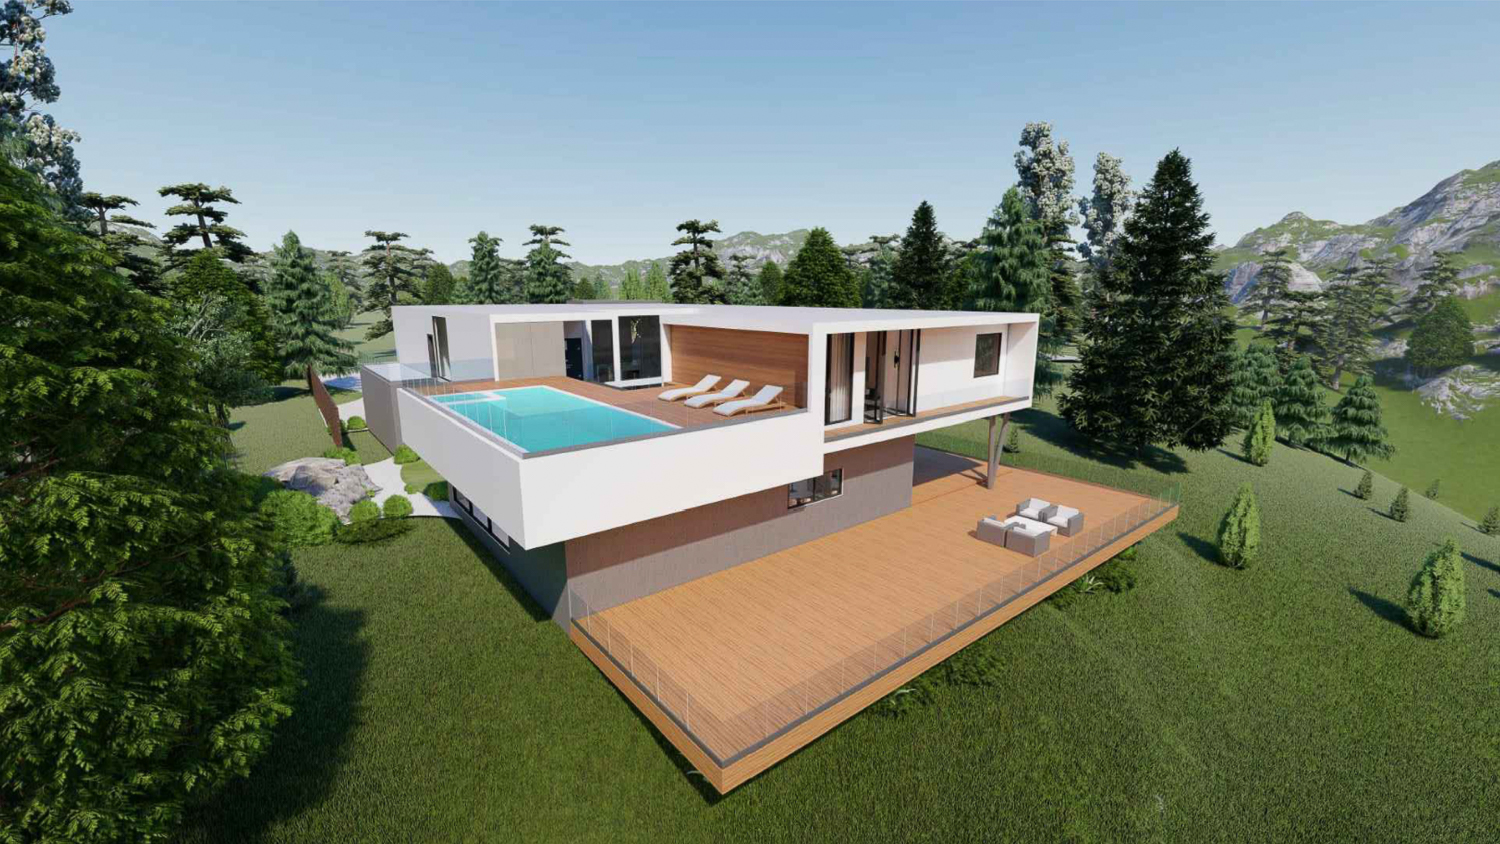 13193 Skyline Boulevard aerial perspective of the rear deck, rendering by Ben Tarcher Architects